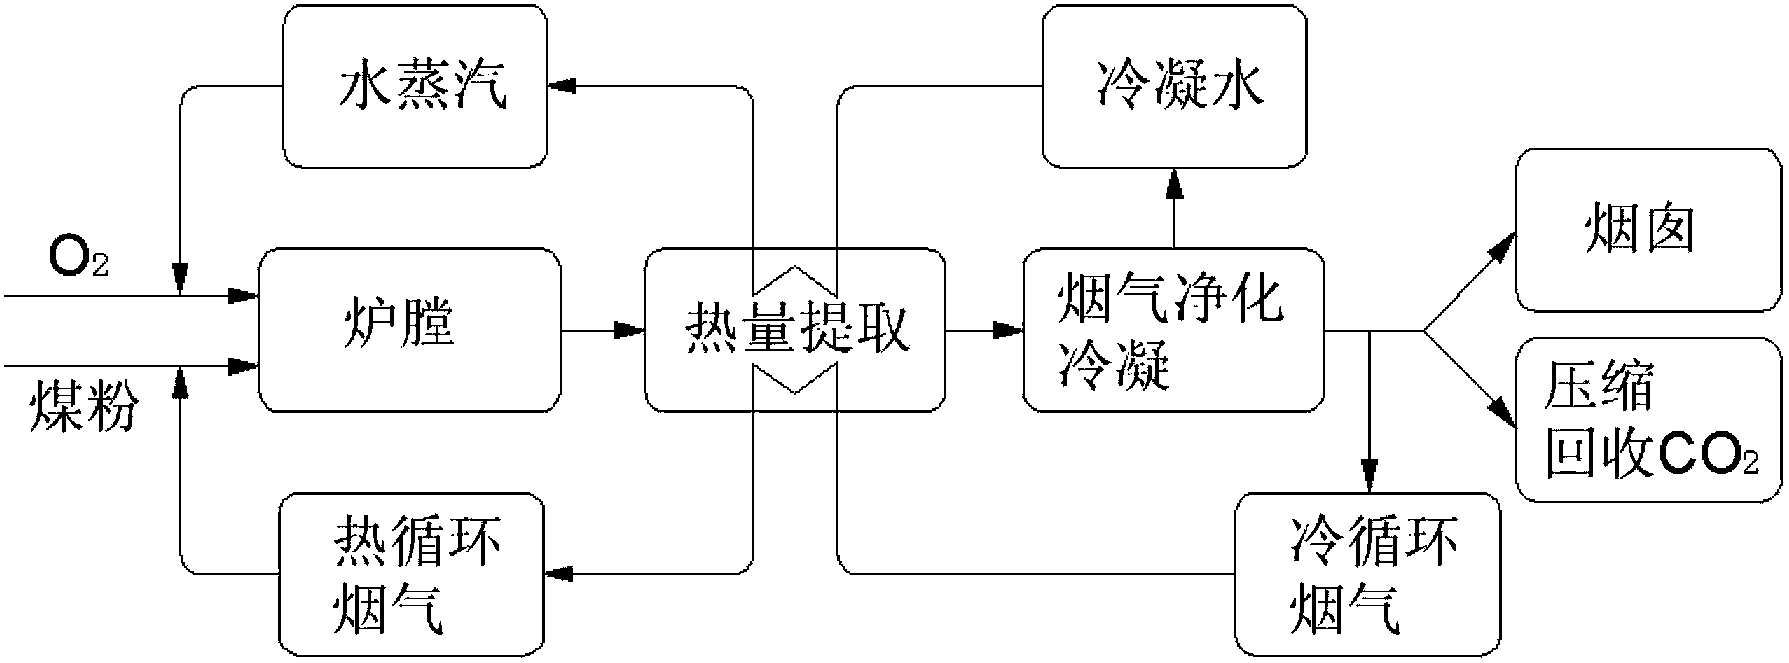 Water vapor circularly adjusting type oxygen-enriched combustion method for pulverized coal boiler